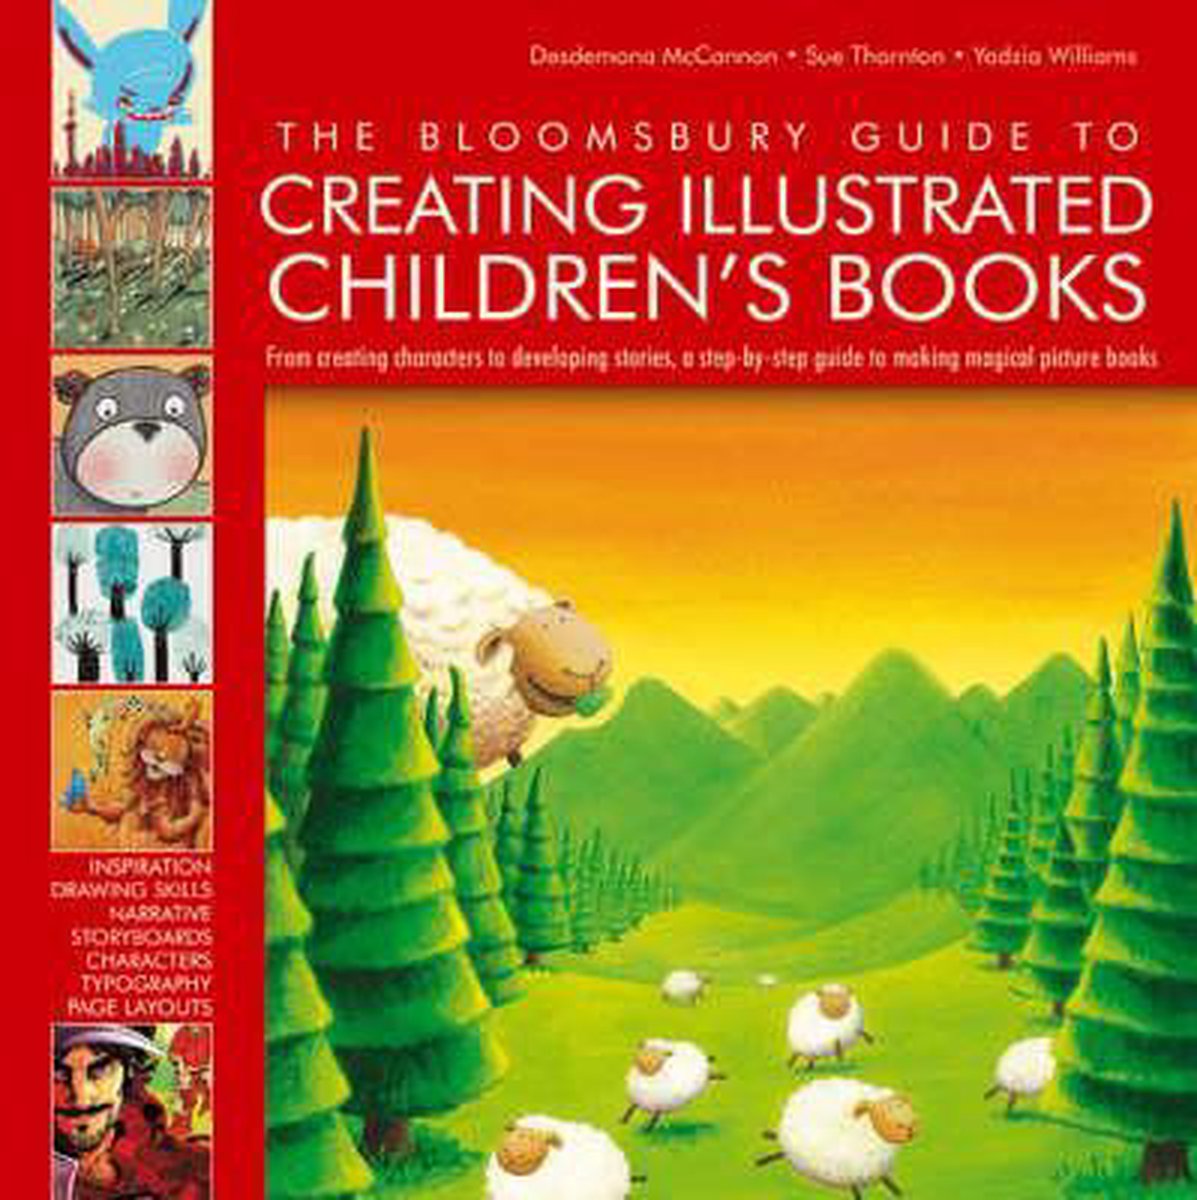 The Bloomsbury Guide to Creating Illustrated Children's Books - Desdemona Mccannon